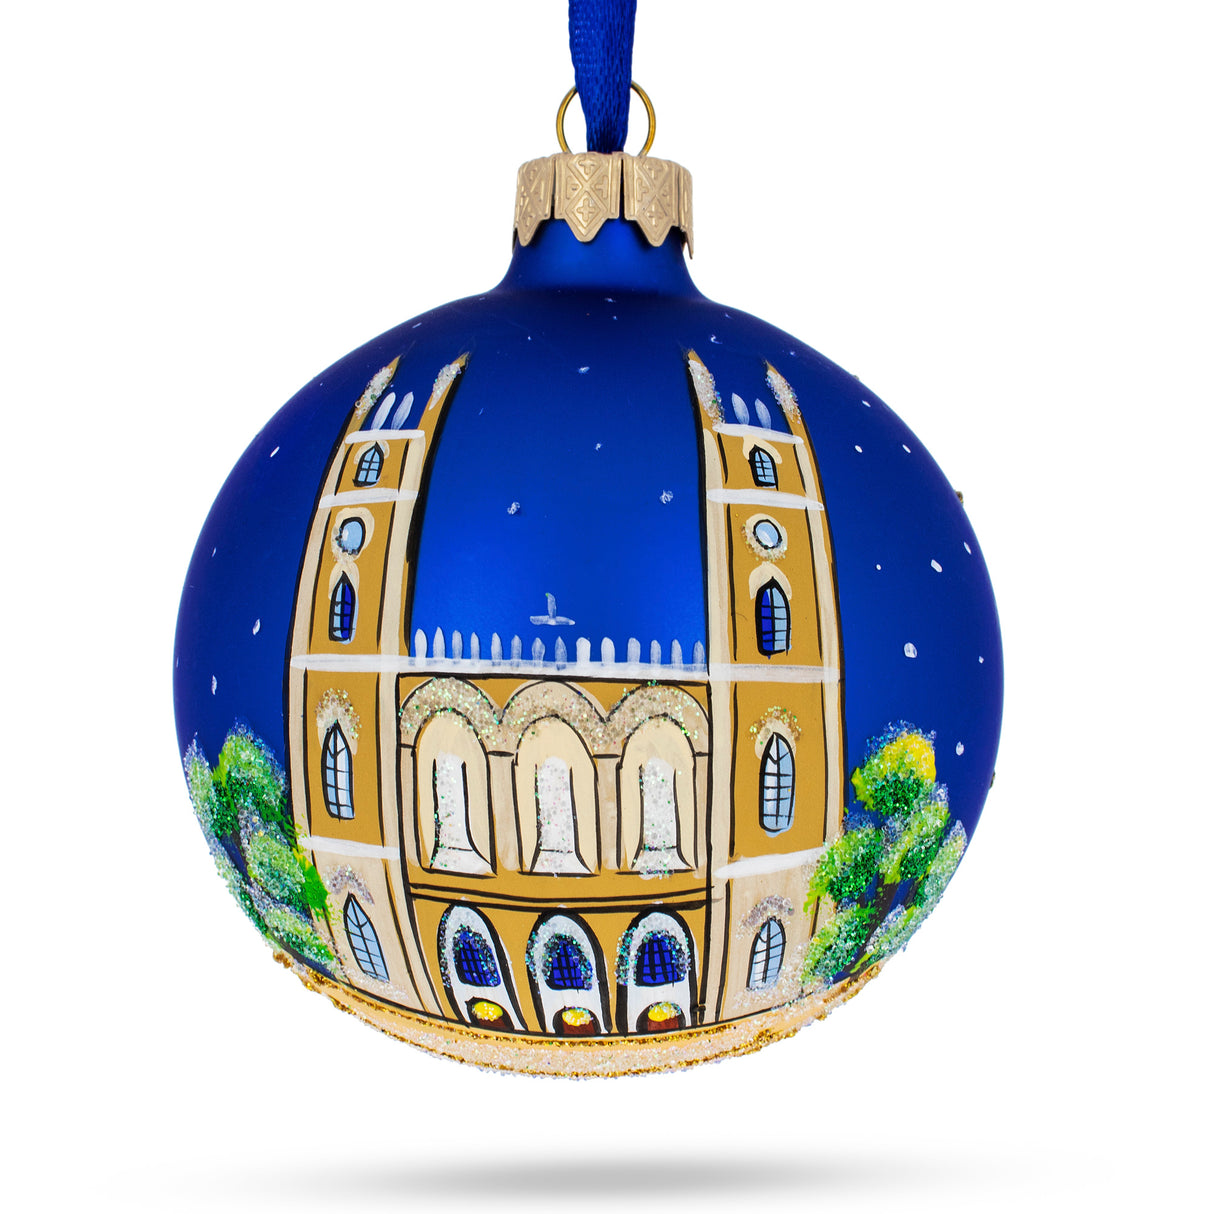 Glass Notre-Dame Basilica, Montreal, Canada Glass Ball Christmas Ornament 3.25 Inches in Multi color Round